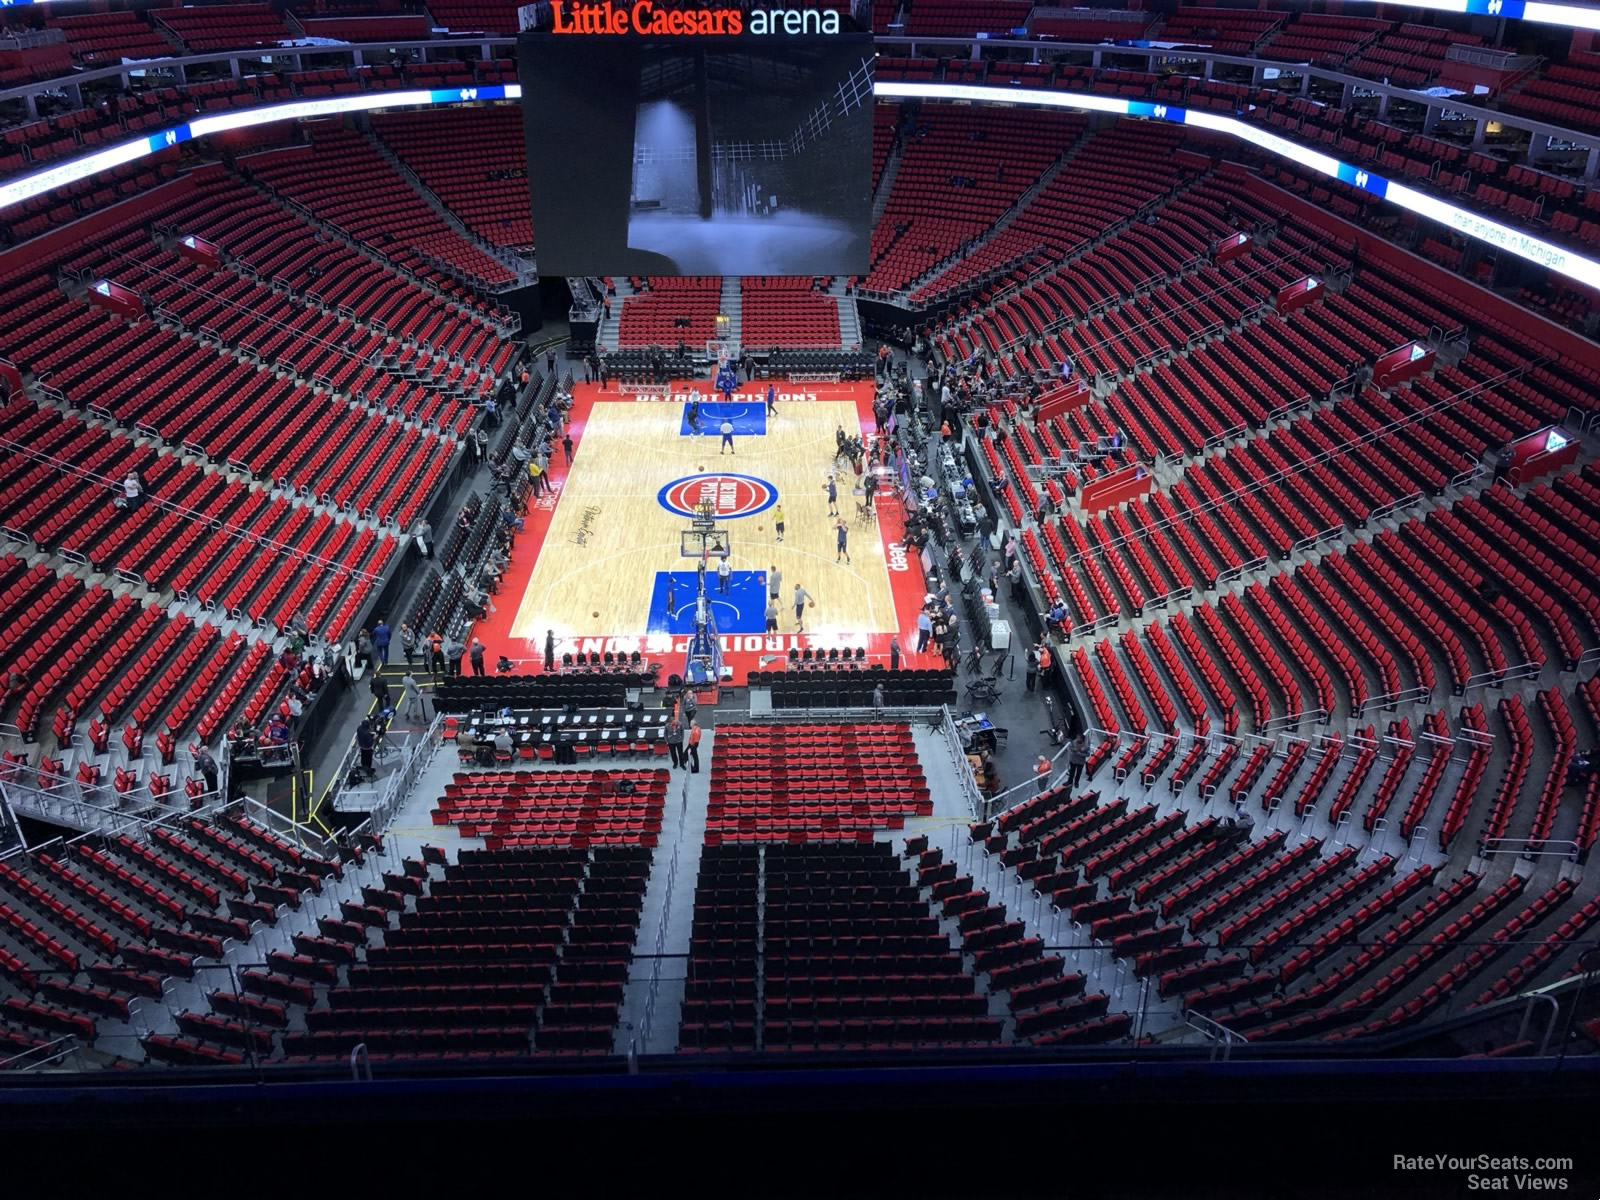 section 203, row 4 seat view  for basketball - little caesars arena